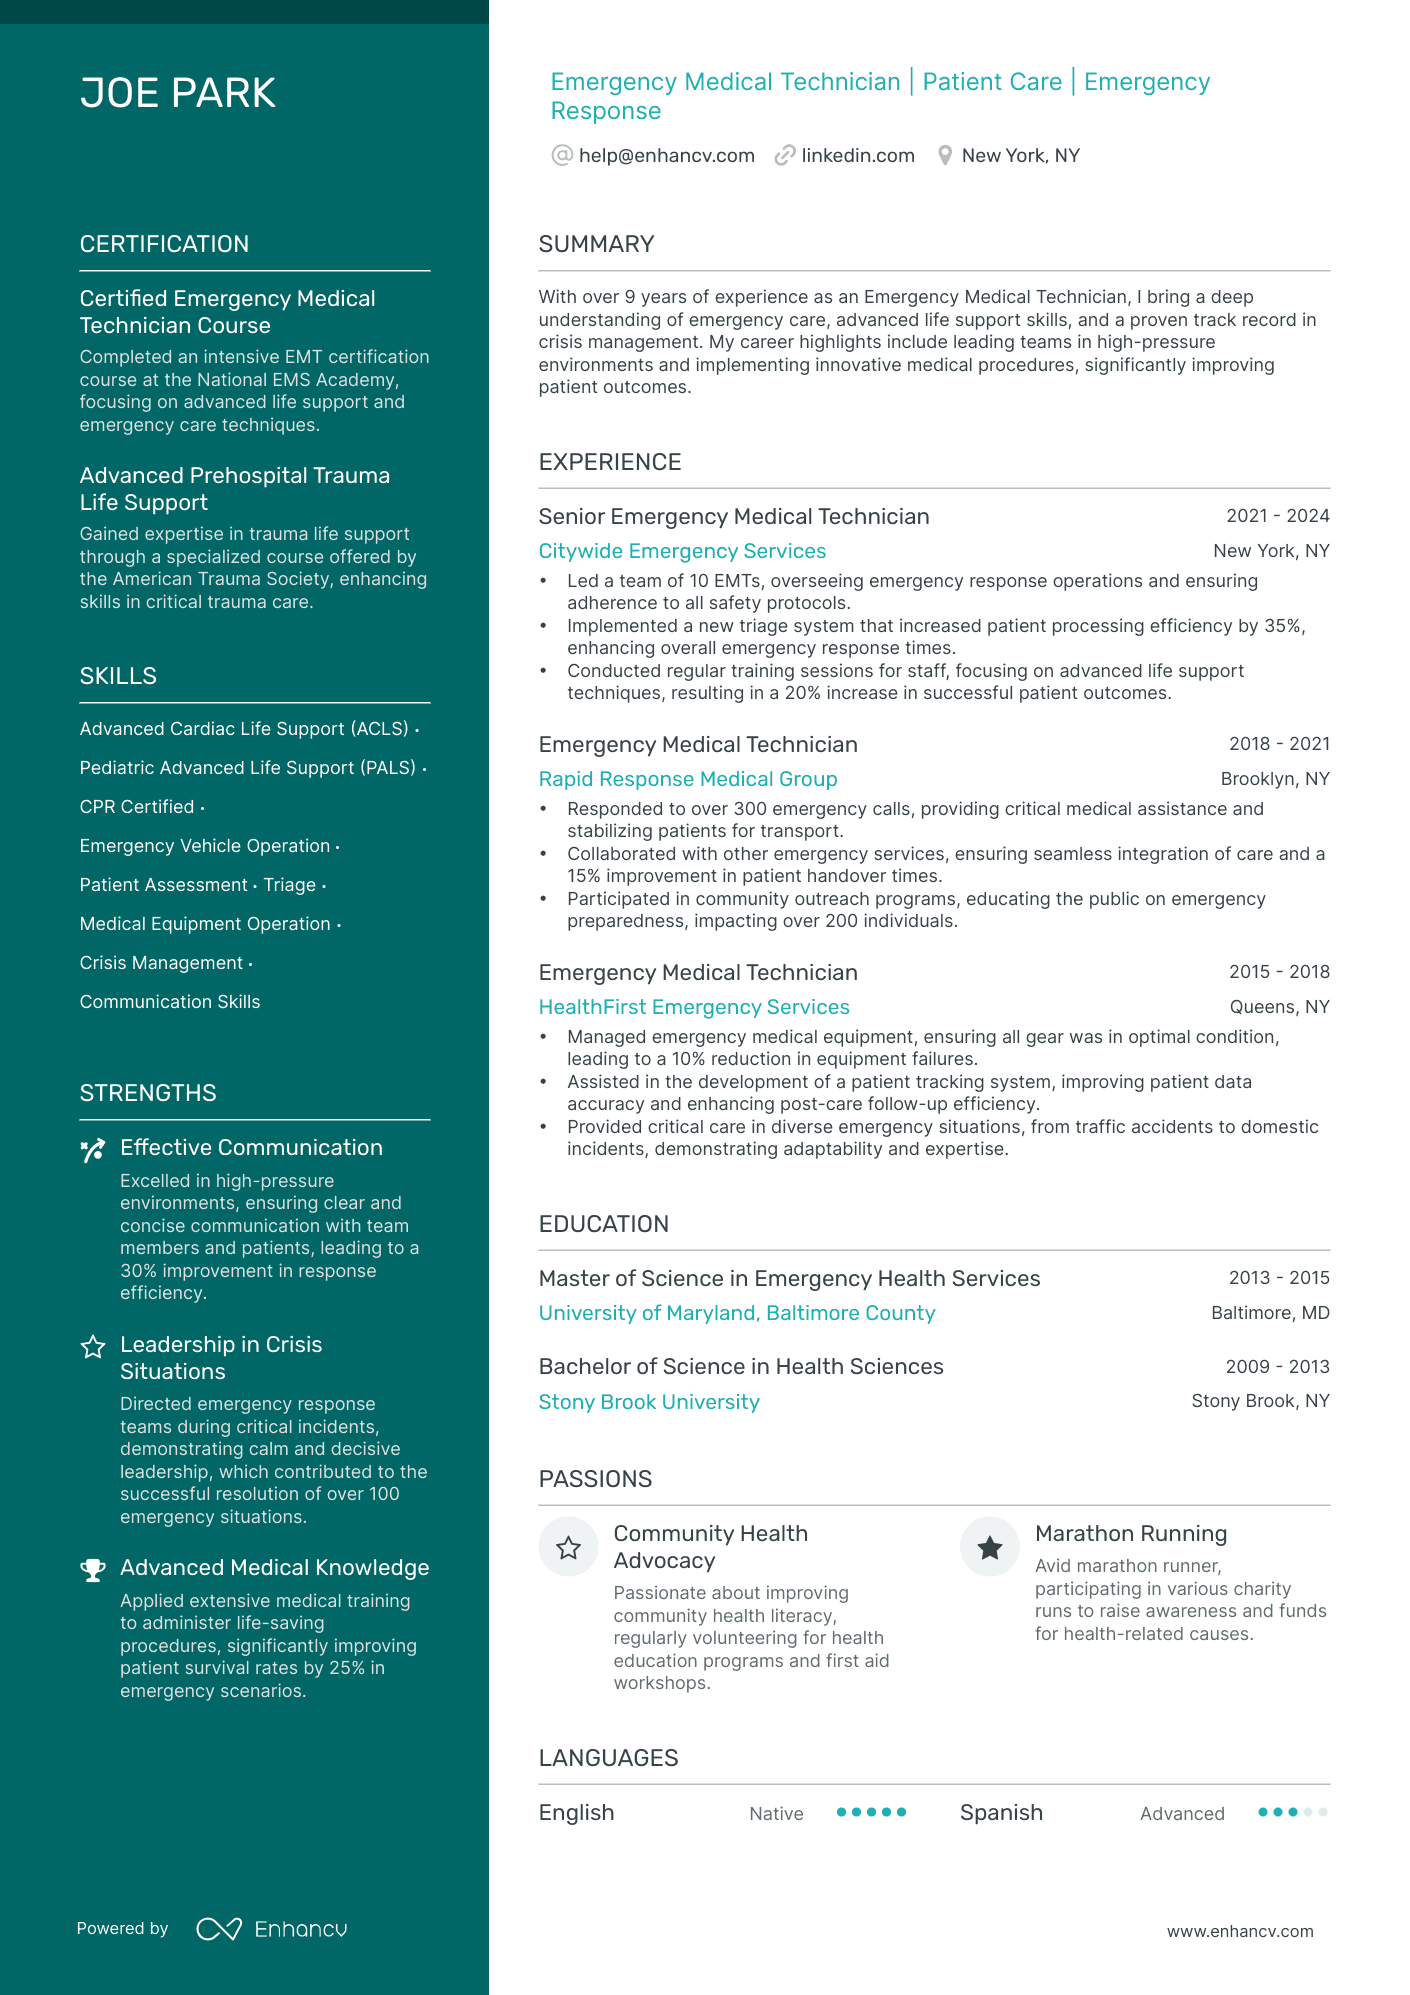 Emergency Medical Technician | Patient Care | Emergency Response resume example